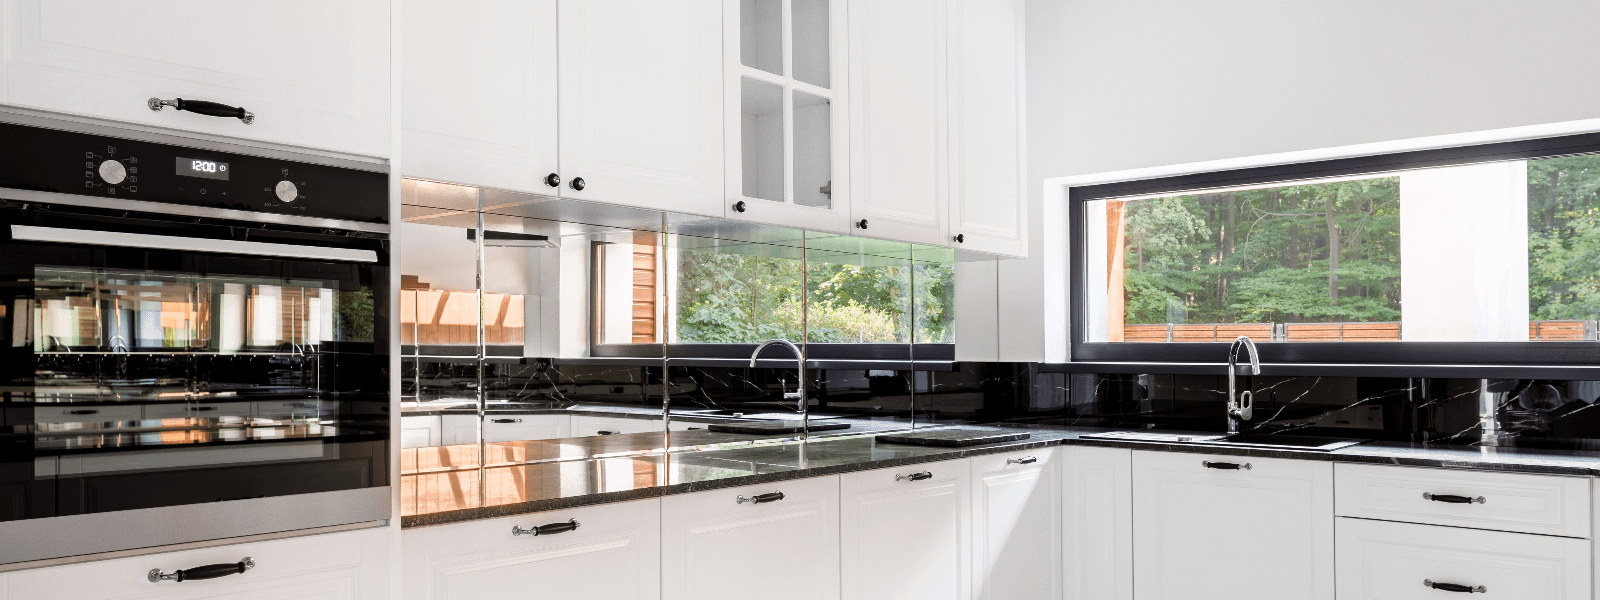 Black and white modern kitchen with mirror splashback and built-in oven.